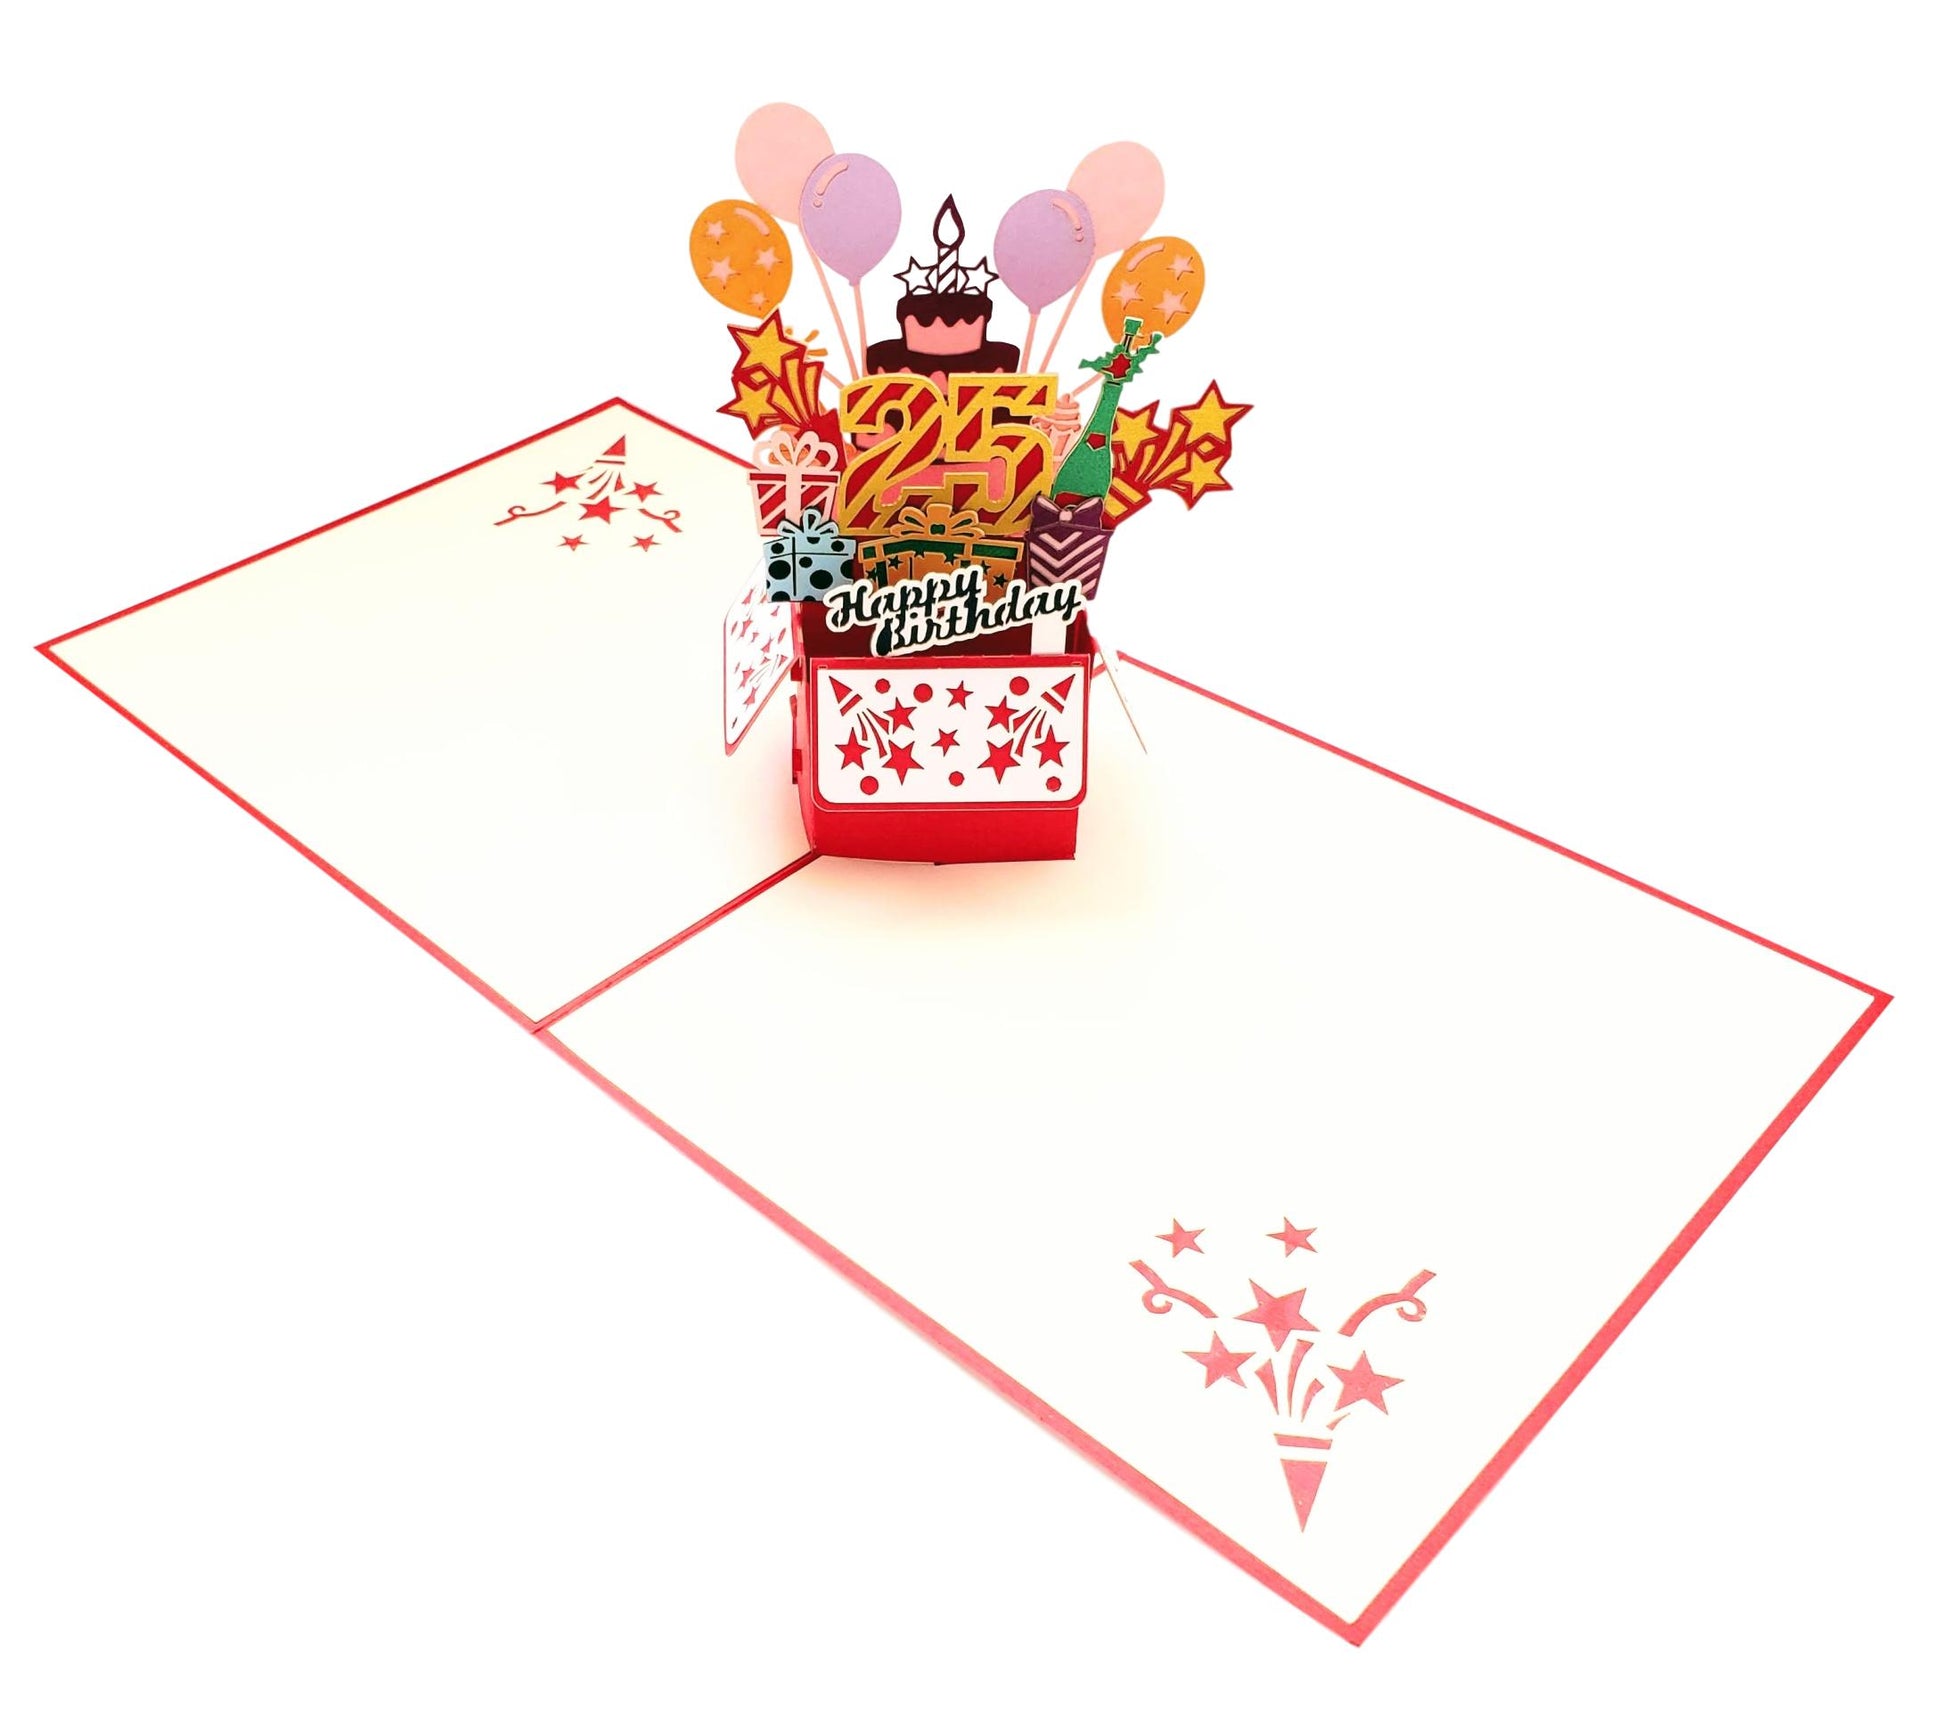 25th Red Party Box 3D Pop Up Greeting Card - Awesome - Balloons - best wishes - Birthday - Brighten - iGifts And Cards